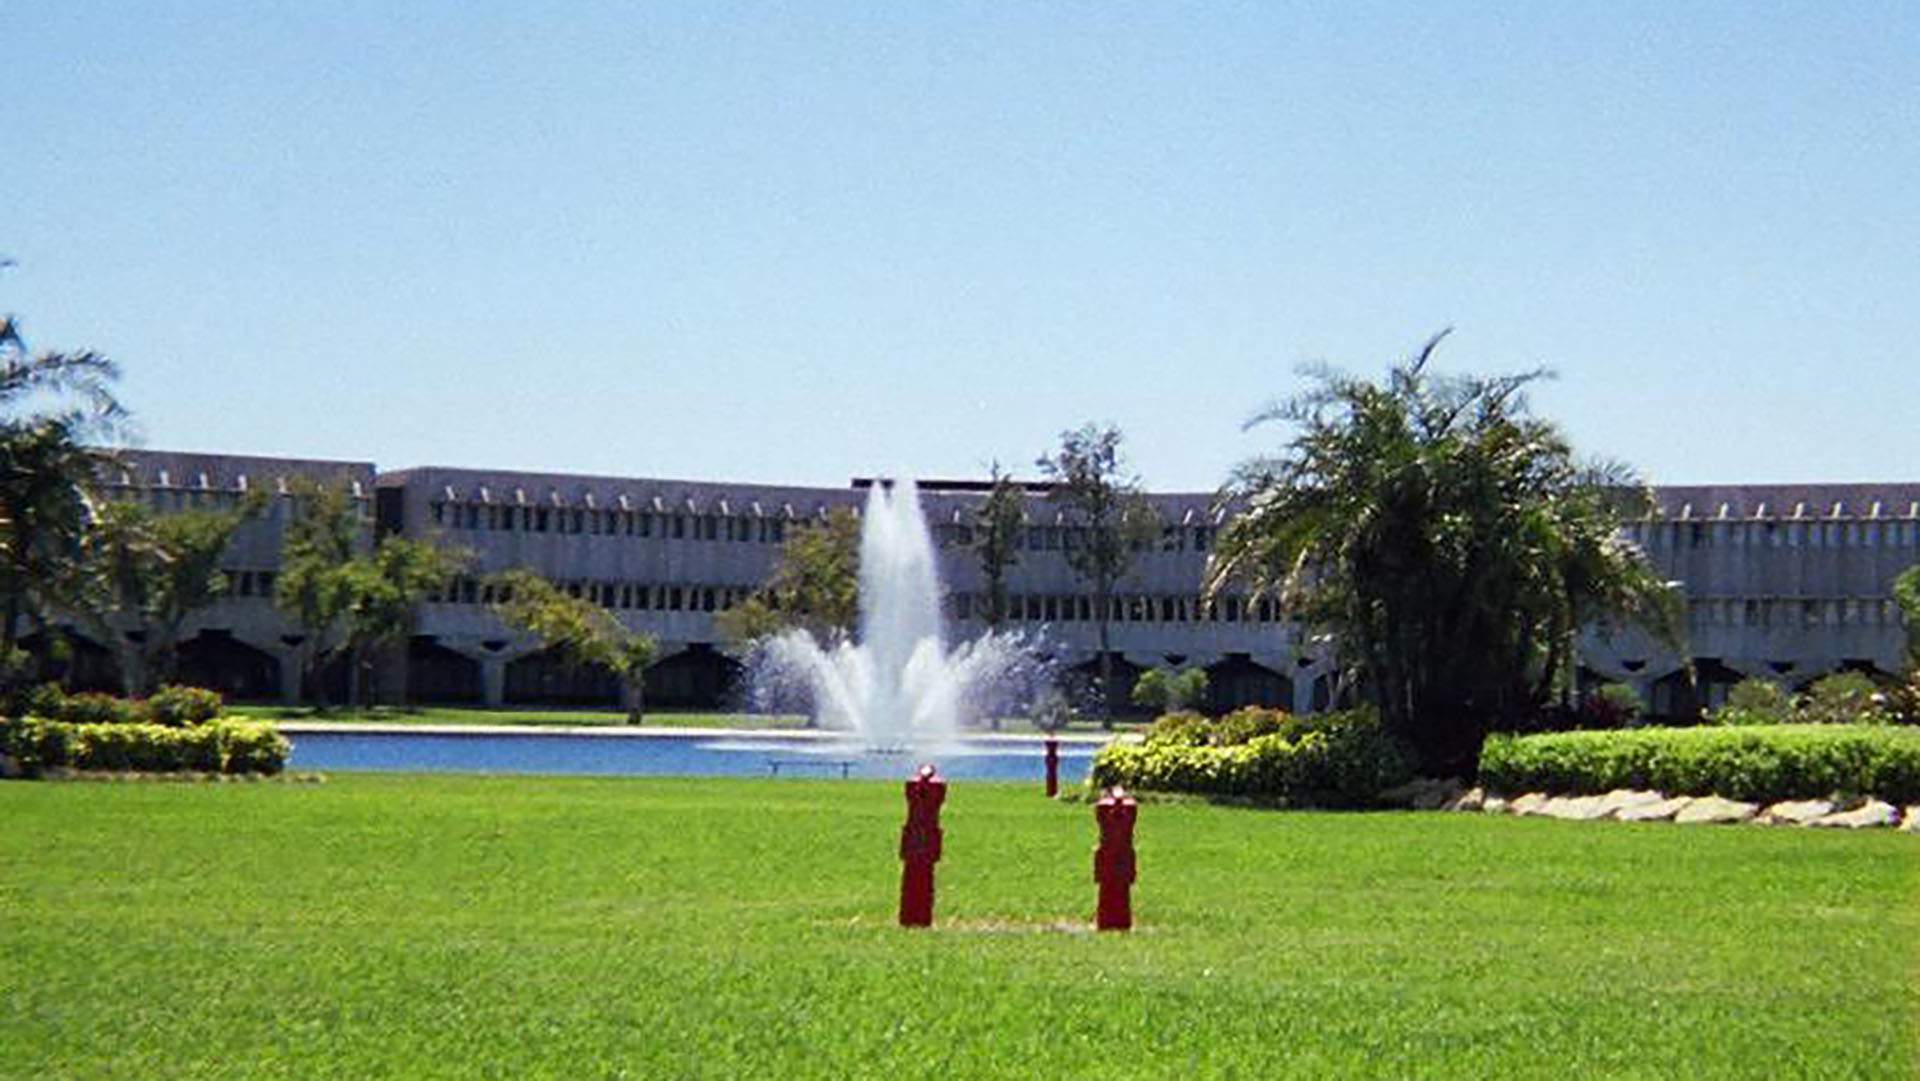 A picture of the fountains at what used to be IBM's research facility in Boca Raton, Florida